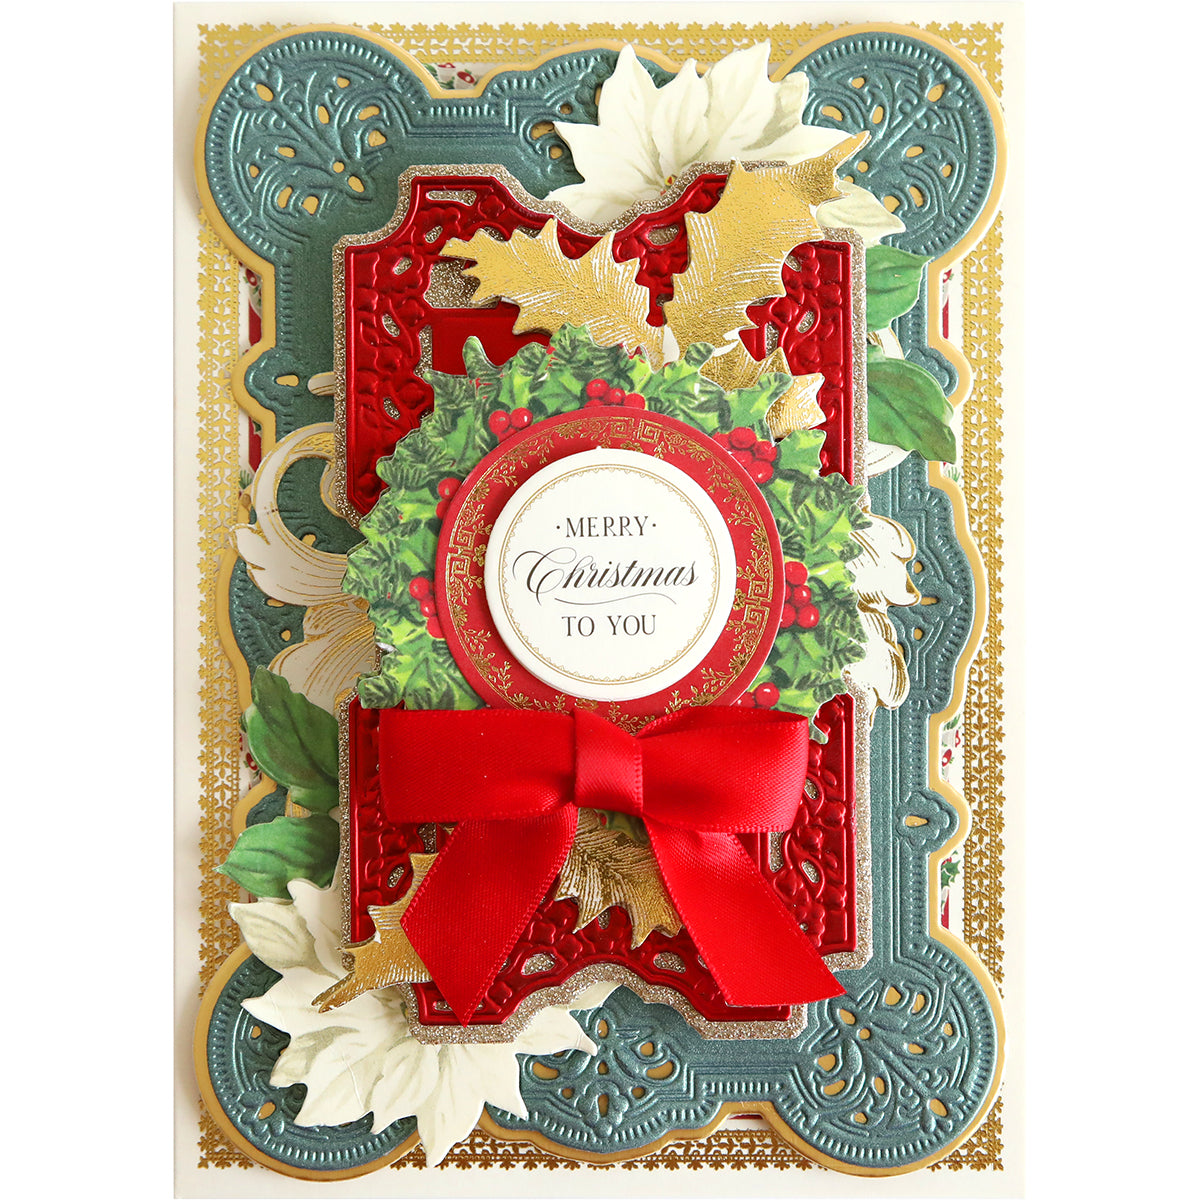 A Victorian Christmas card with a festive wreath and bow can be created using the Victorian Christmas Dies.